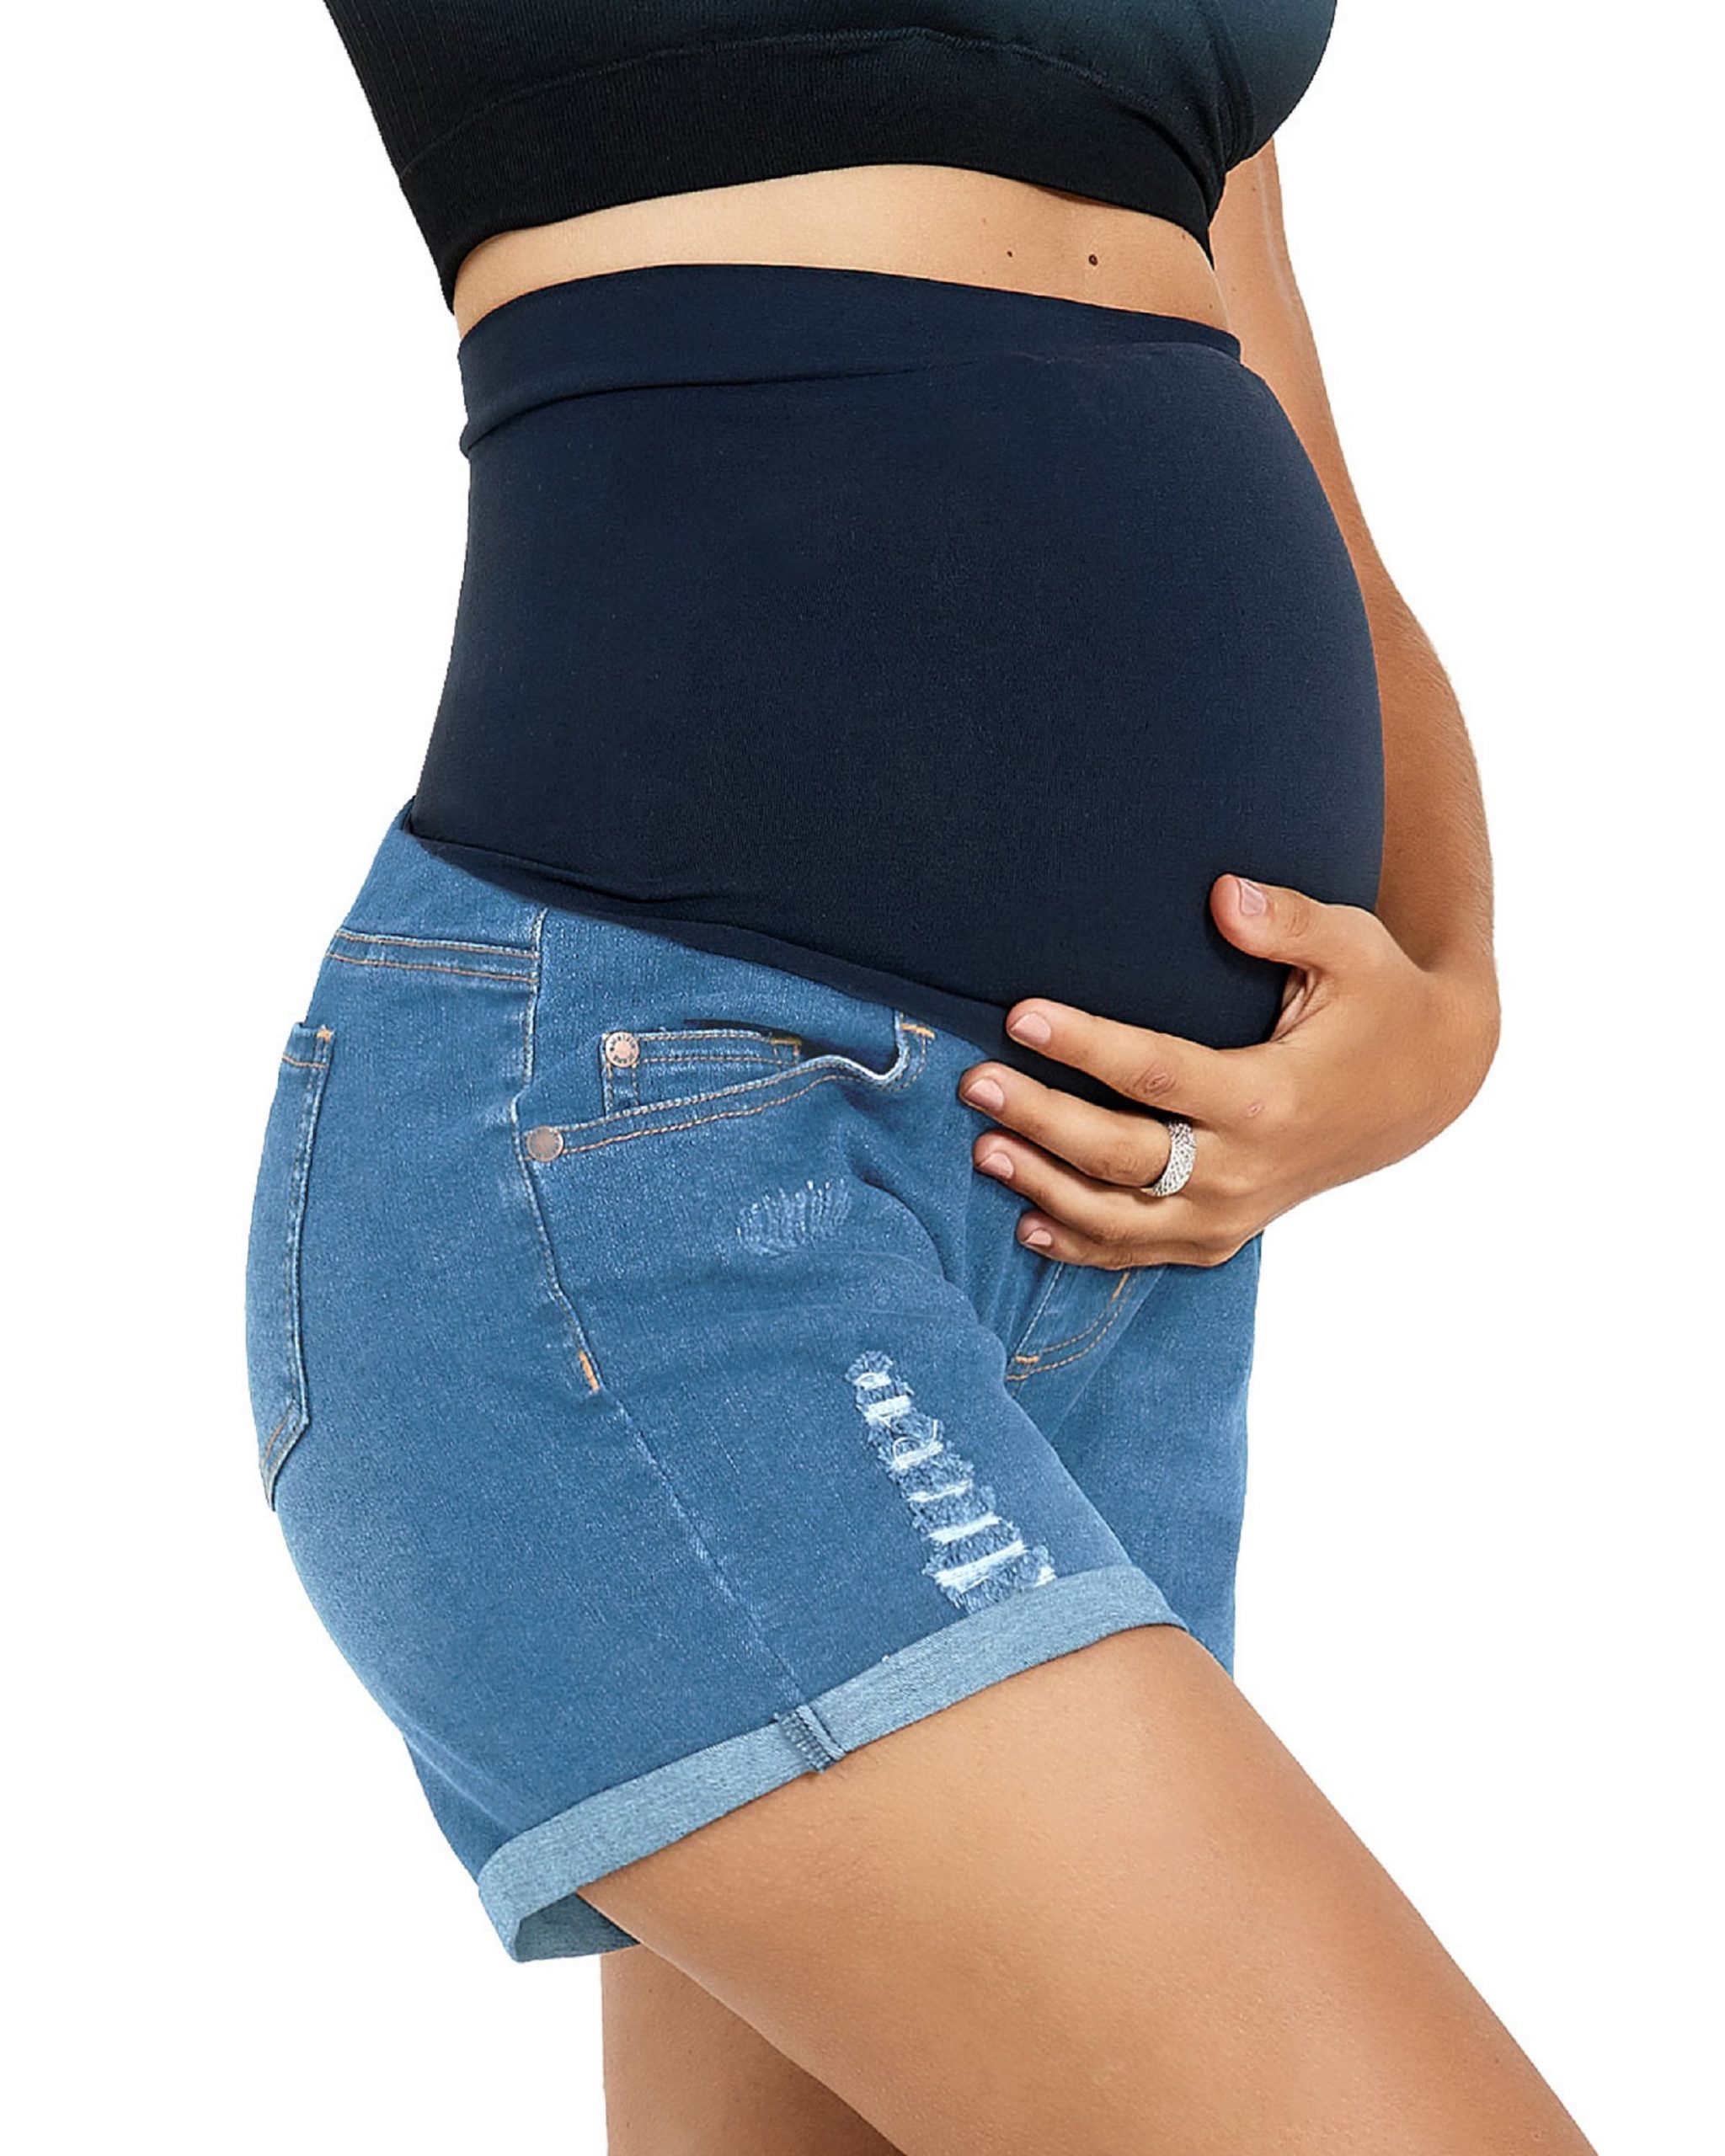 HOFISH Women’s Over The Belly Pregnancy Support Maternity Shorts